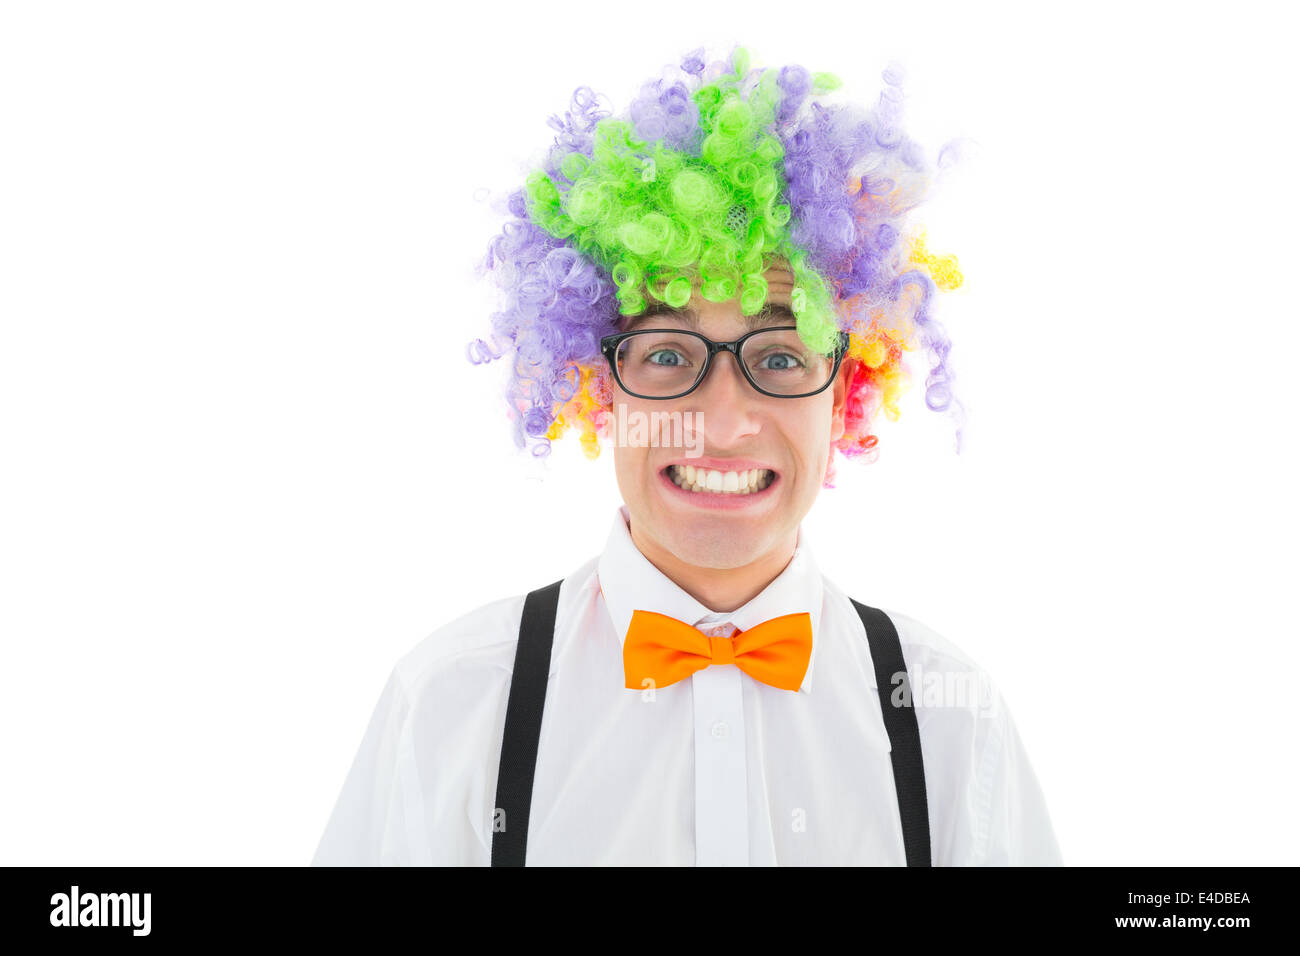 Geeky hipster wearing a rainbow wig Stock Photo